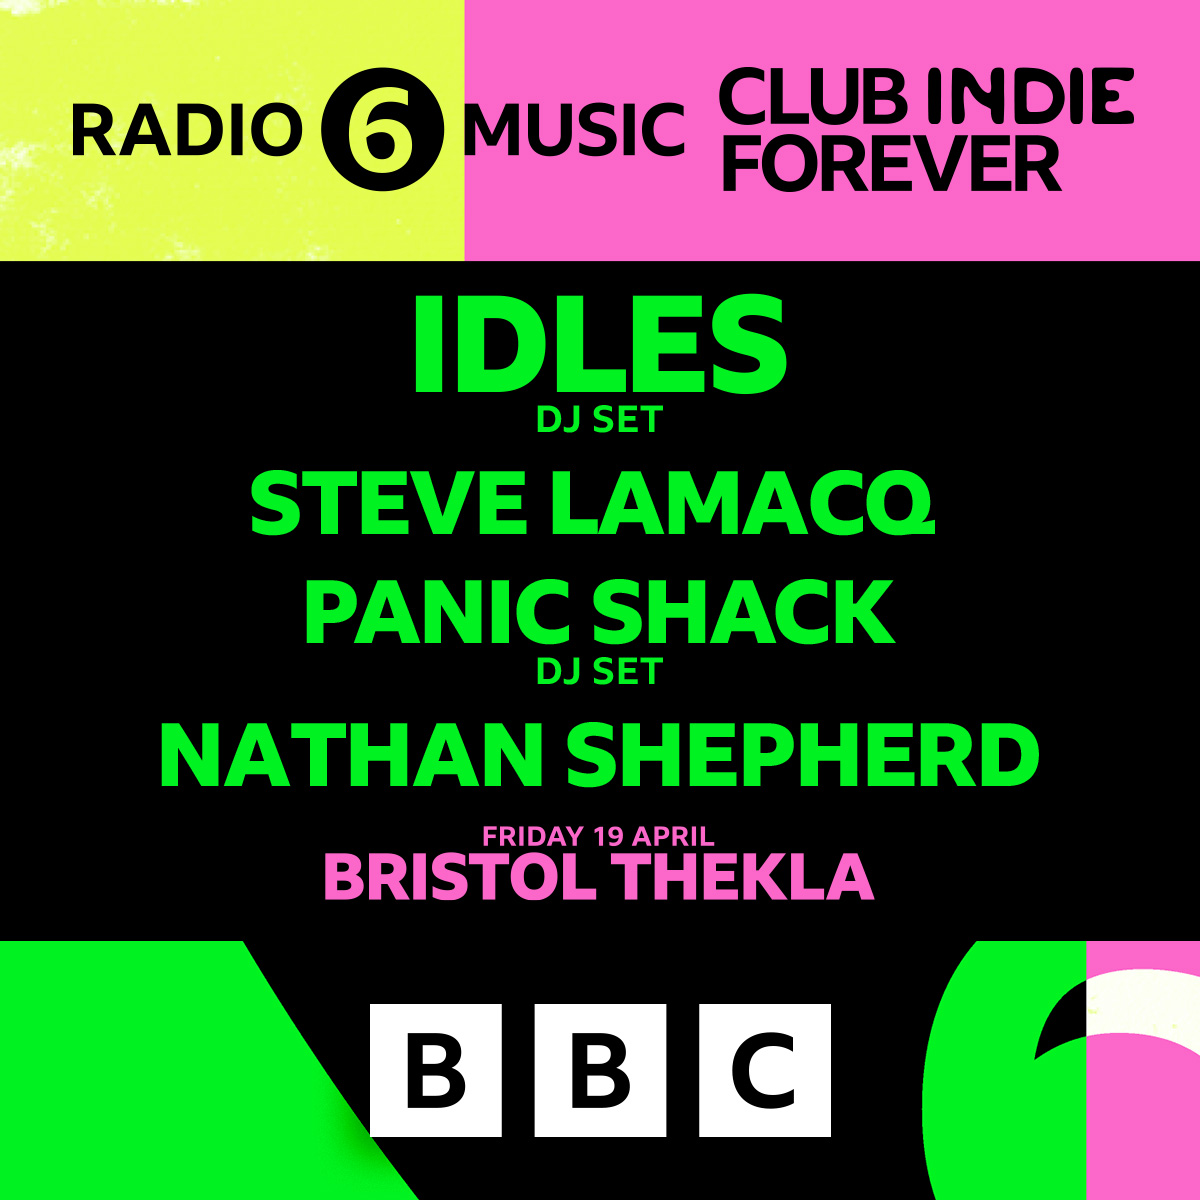 BBC Radio 6 presents Club Indie Forever at Bristol Thekla on Friday 19 April. The line-up includes: Idles (DJ Set), Steve Lamacq, Panic Shack (DJ Set) and more. On sale Friday at 10:00 >> bit.ly/3PjhUgG